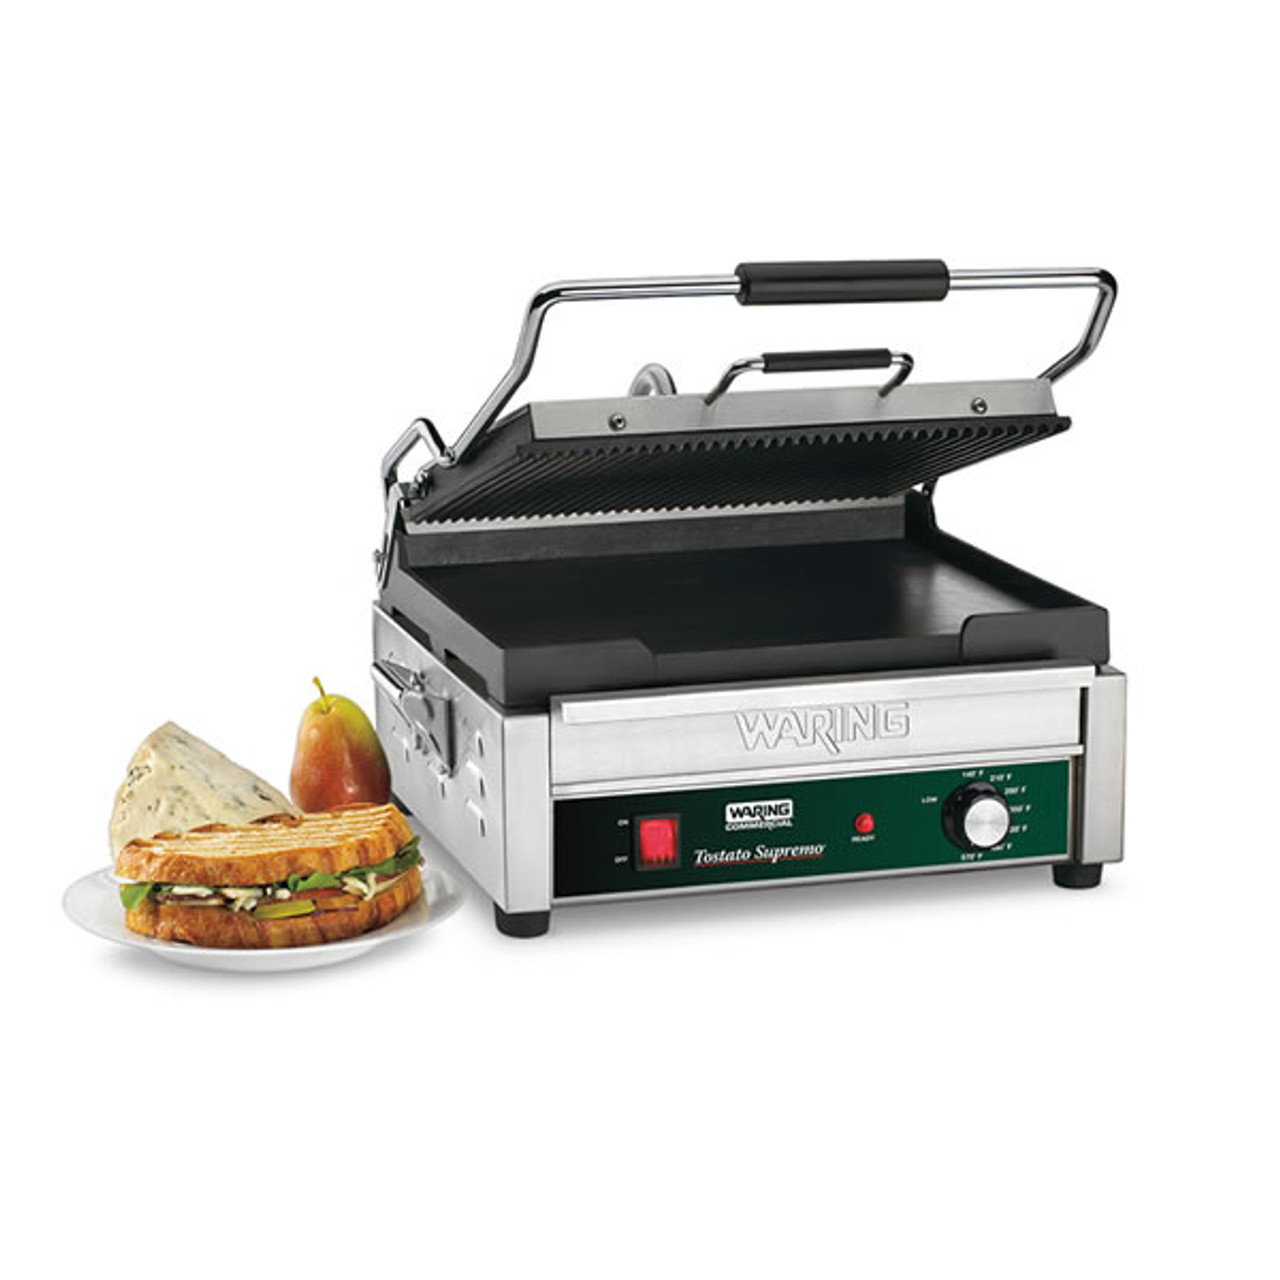 Waring Commercial WPG150 Compact Italian-Style Panini Grill, 120-volt - 1